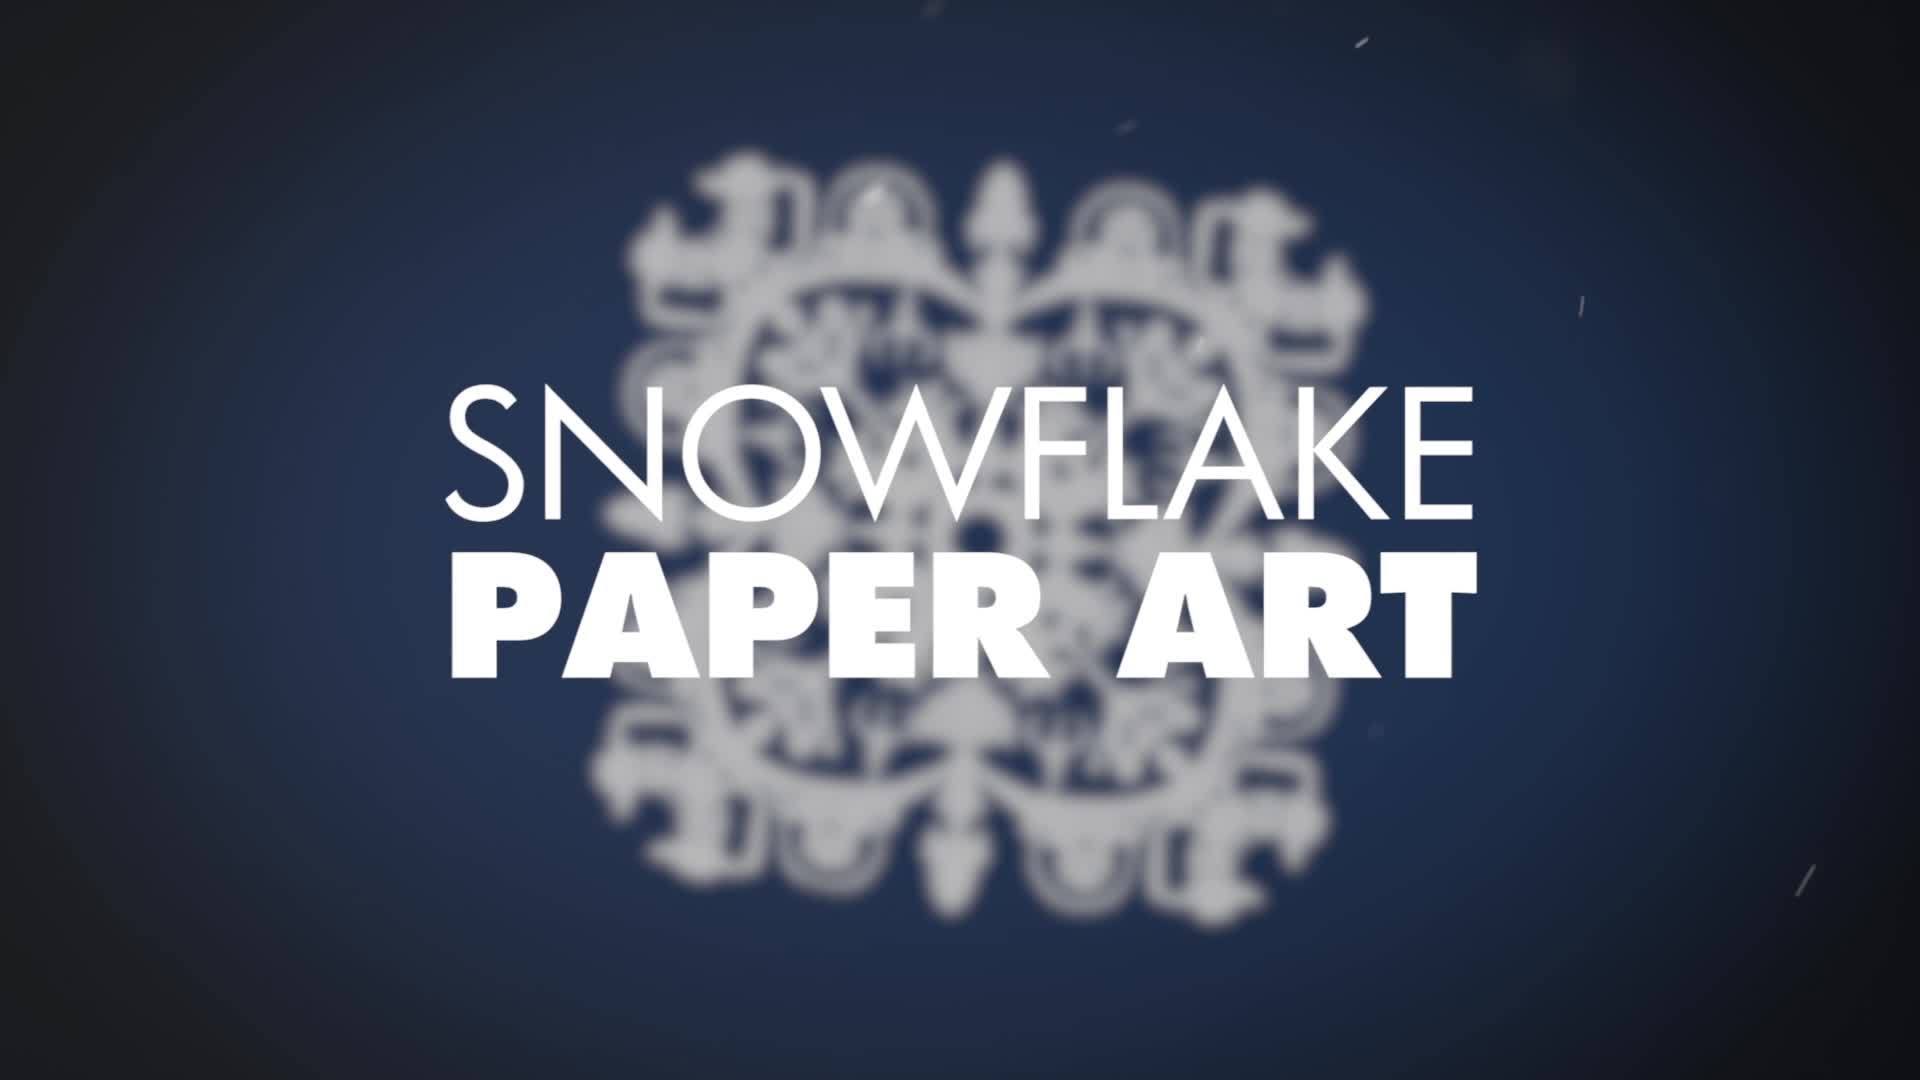 Toy Story Snowflake Paper Art | Oh My Disney